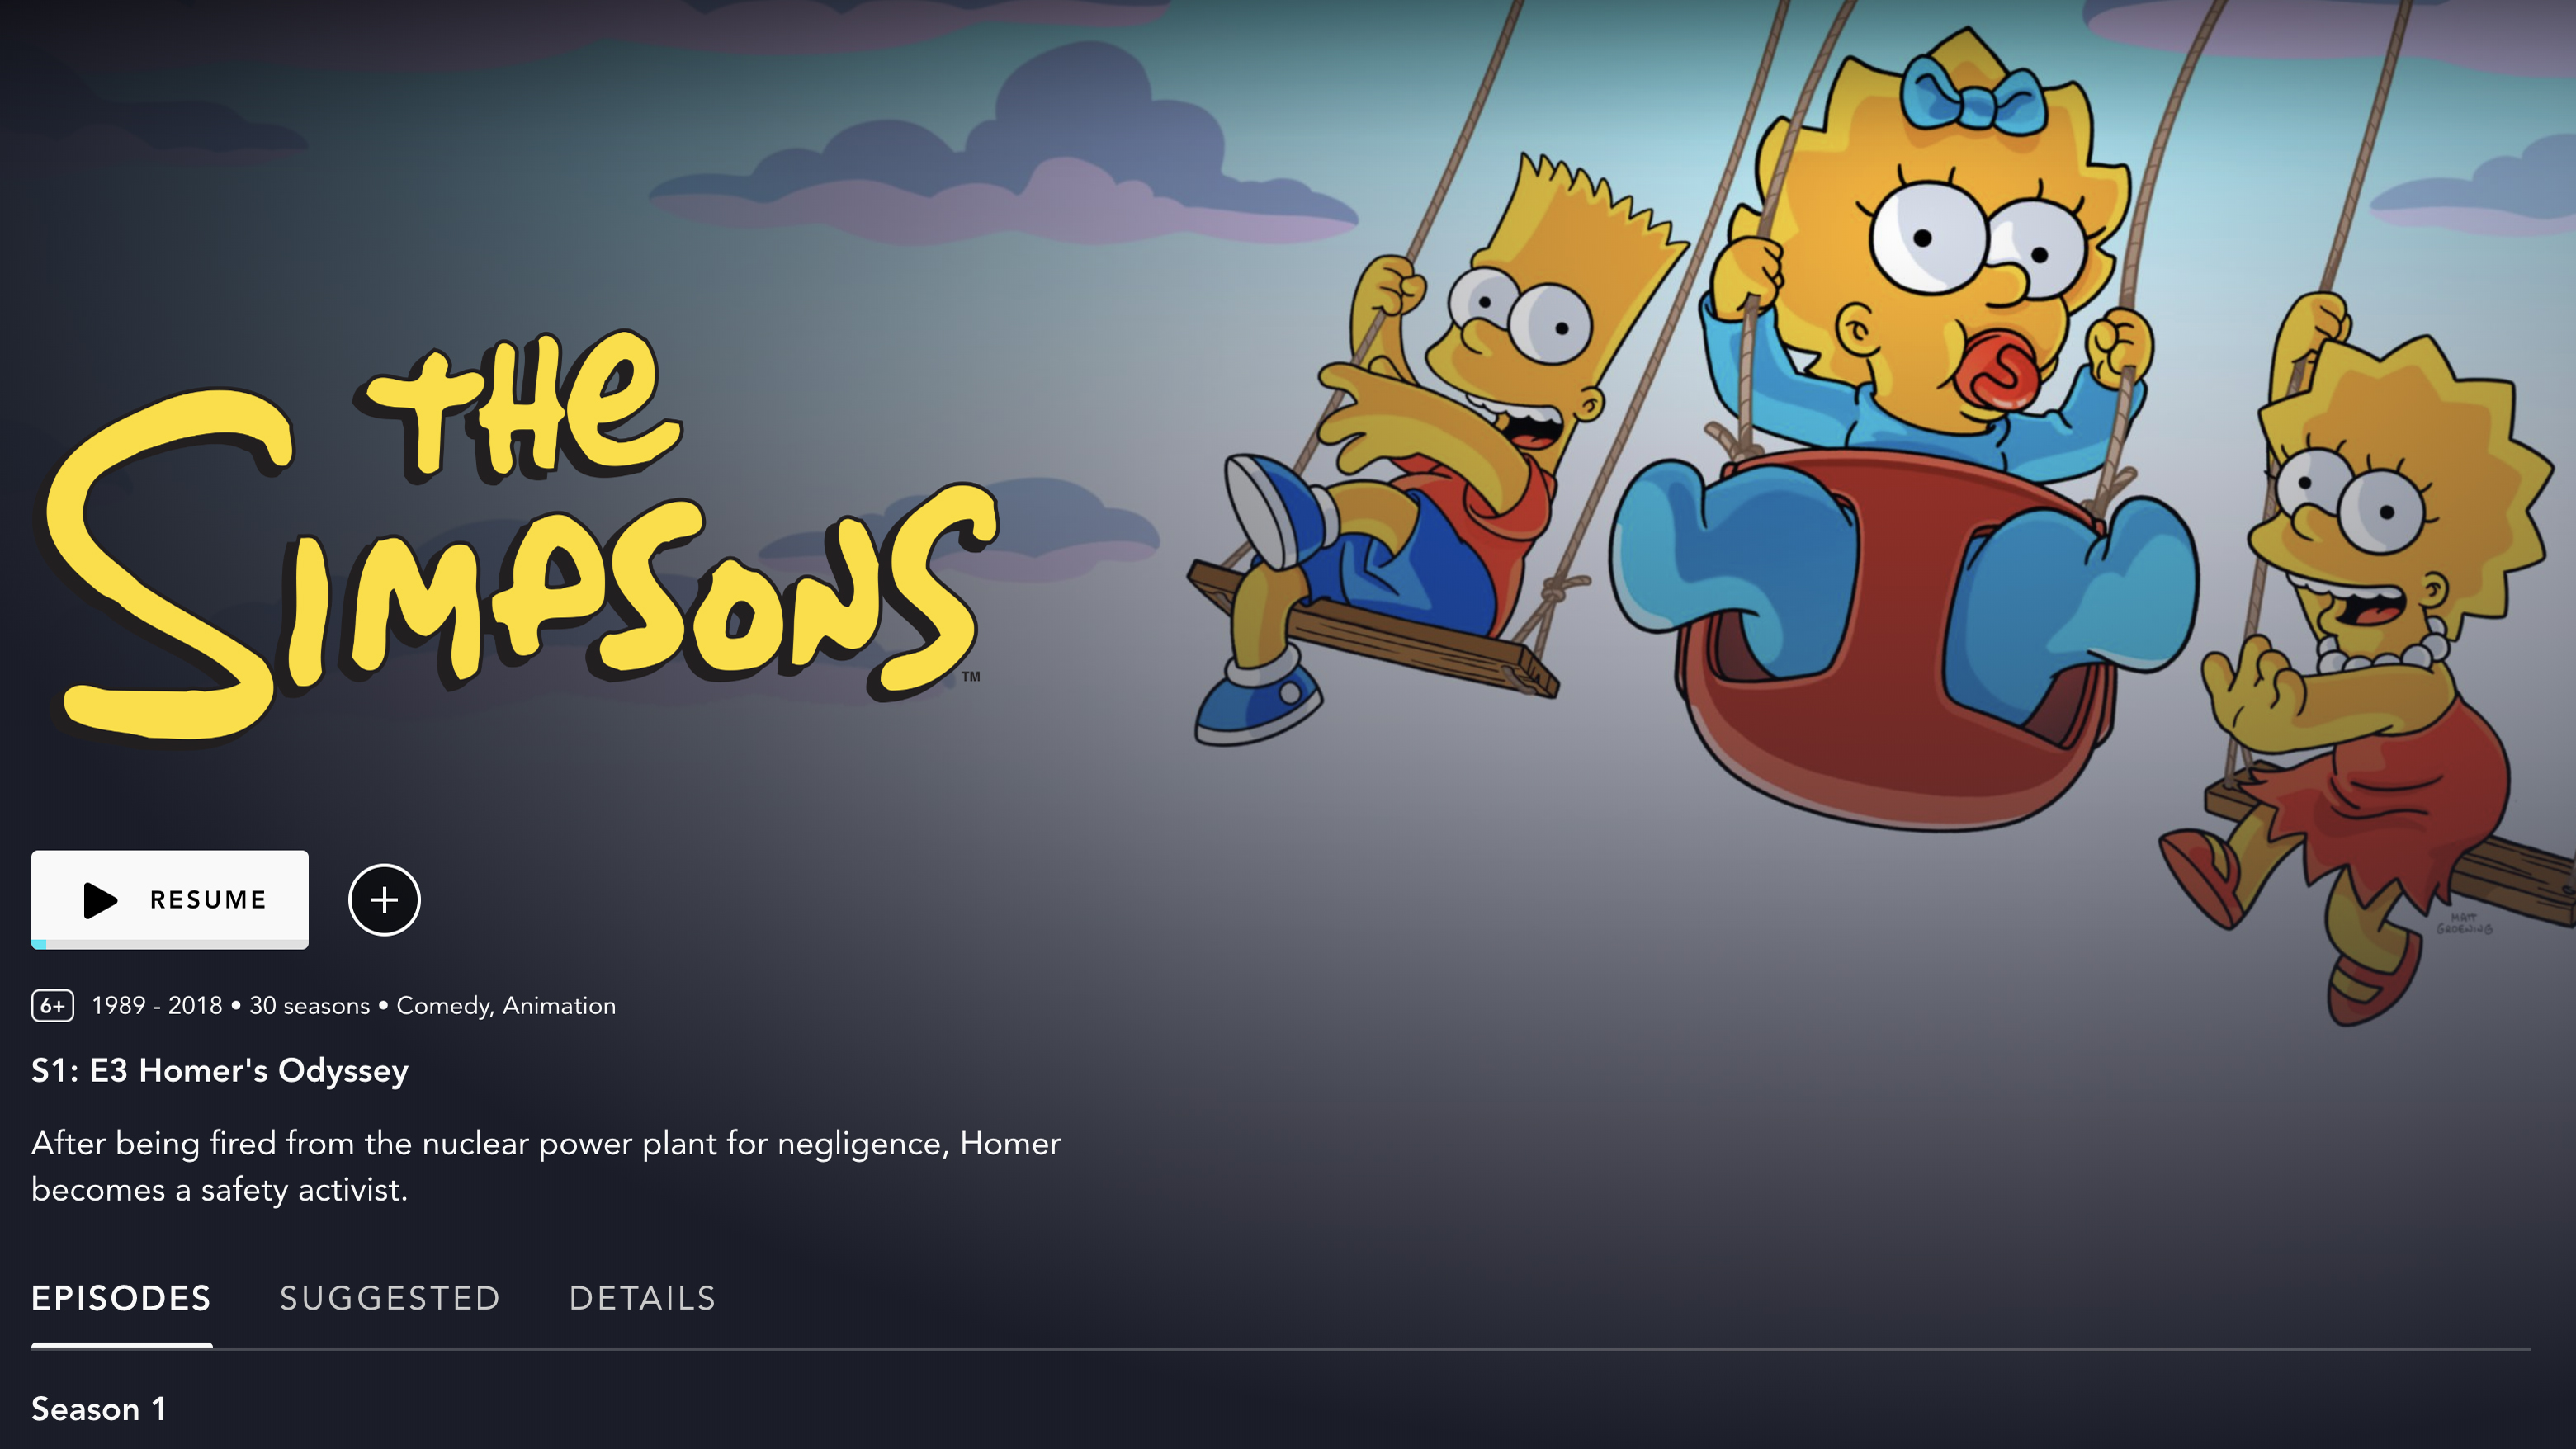 Watching The Simpsons On Disney Plus Here S When It Gets Bad